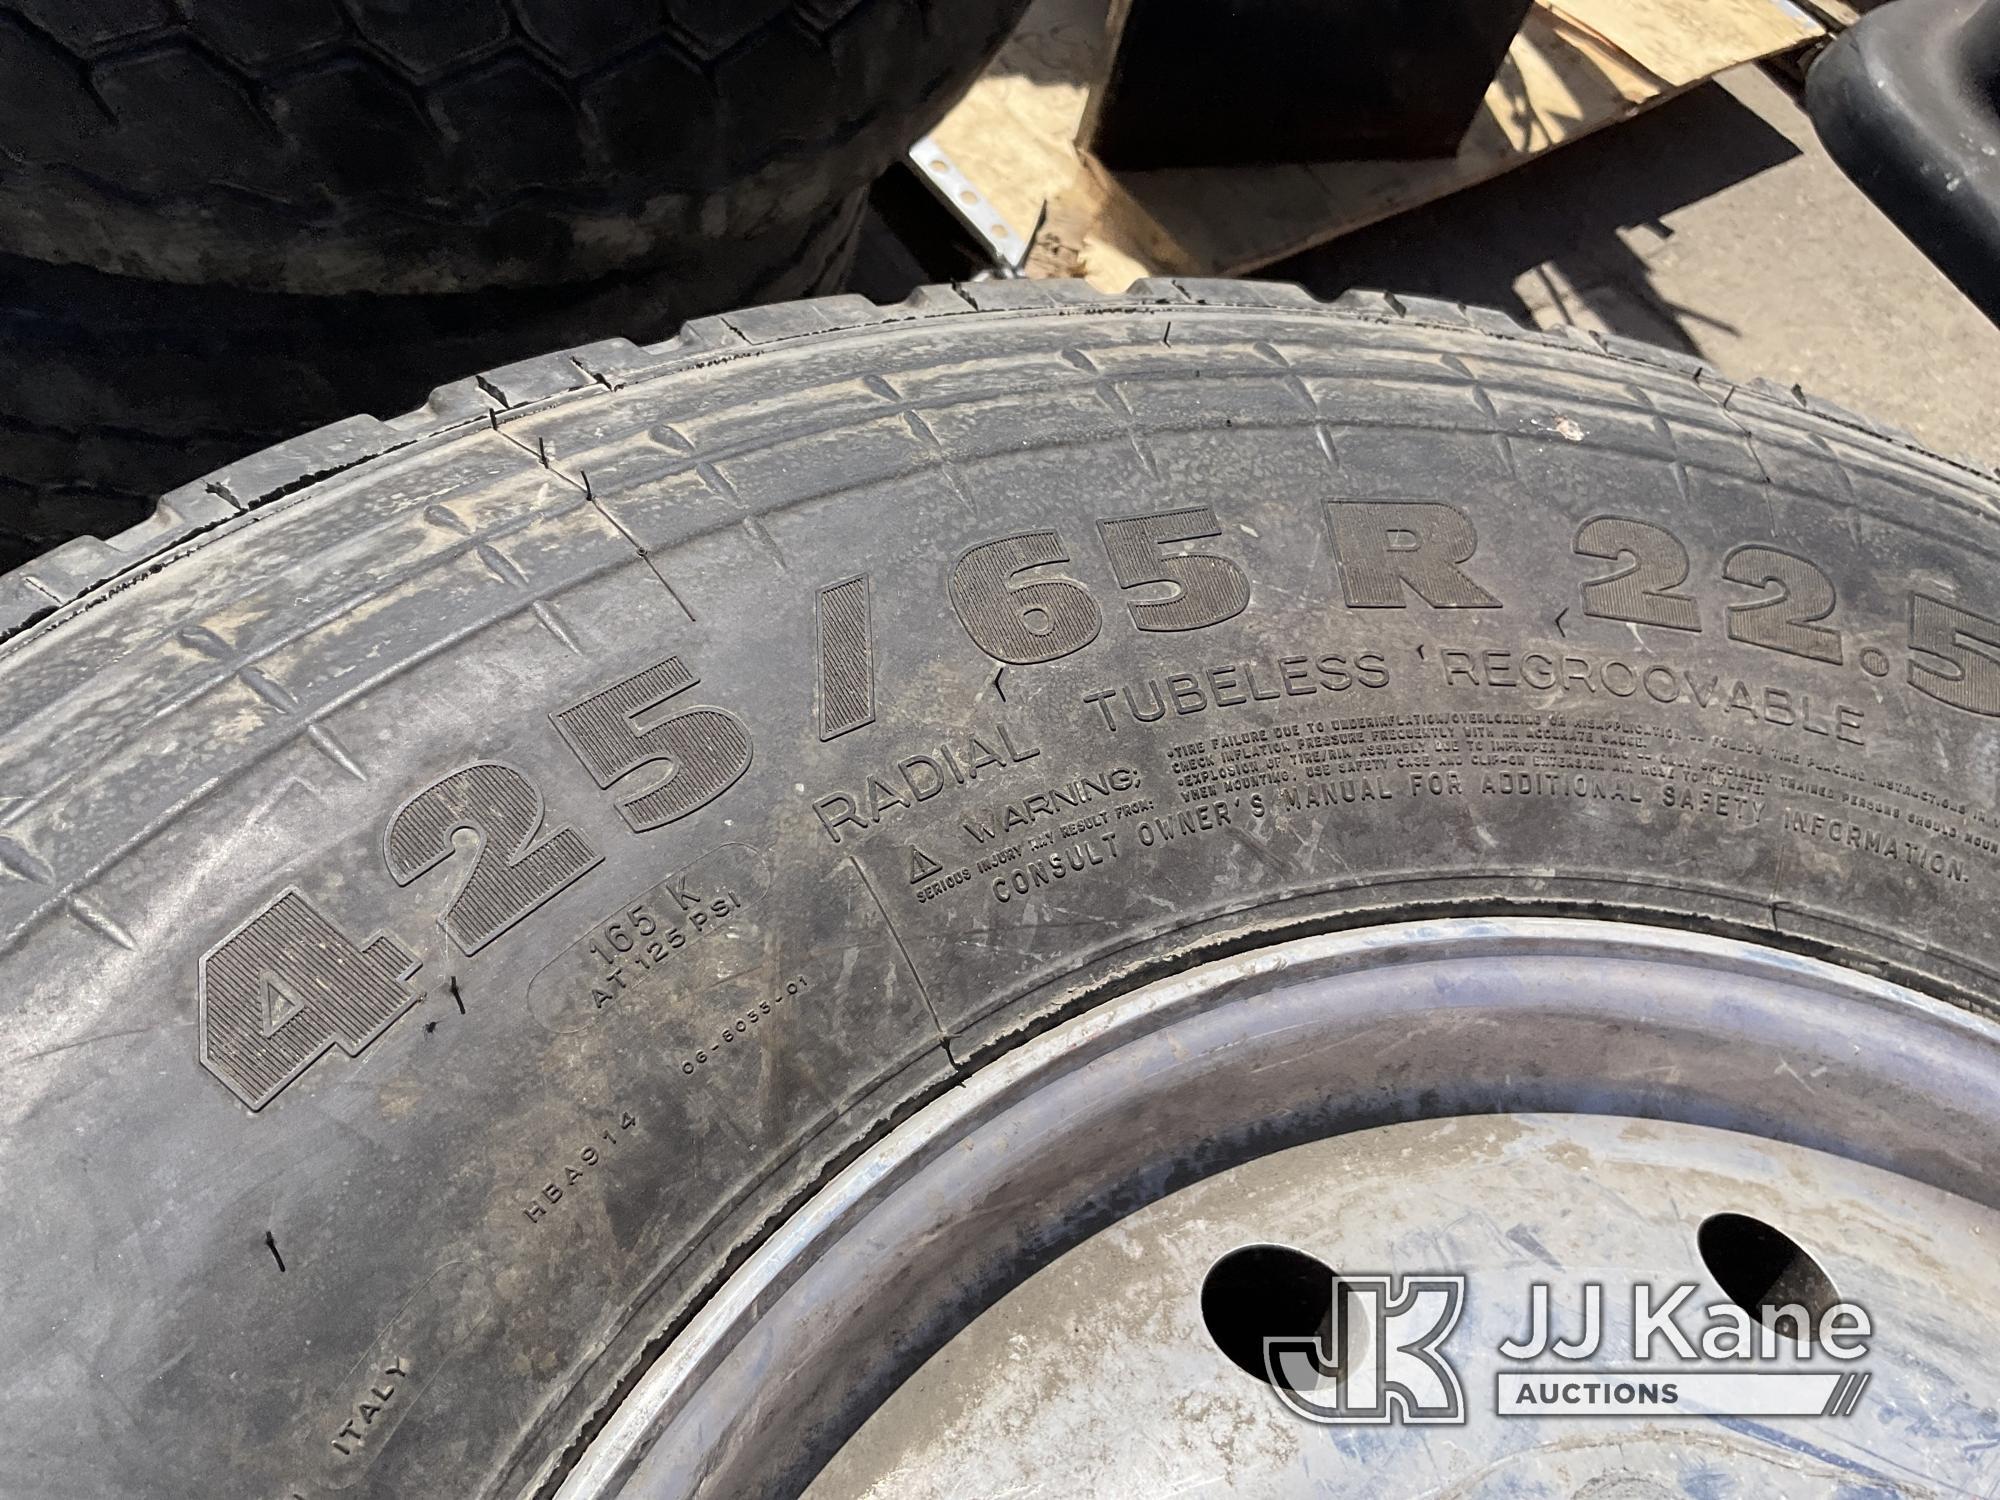 (Dixon, CA) (3) Pallets with Semi Truck Tires (4) 425/65 R 22.5 (2) 445/65 R 22.5 NOTE: This unit is